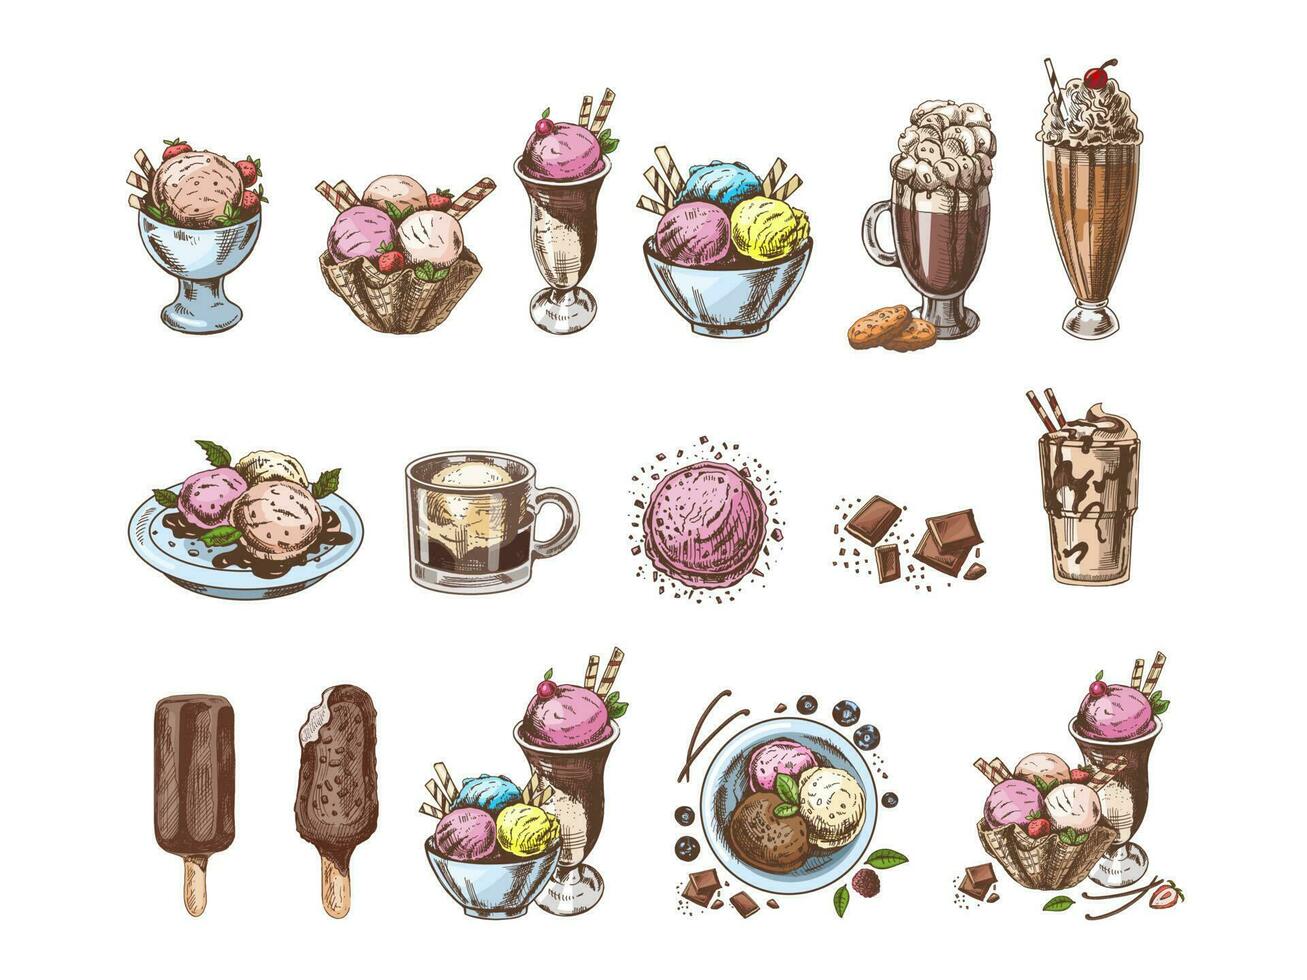 Big hand-drawn colored sketch of ice cream or frozen yoghurt, milkshakes, ice cream on a stick, cupcakes, cookies. Vintage illustration. Set. Element for the design of labels, packaging and postcards. vector